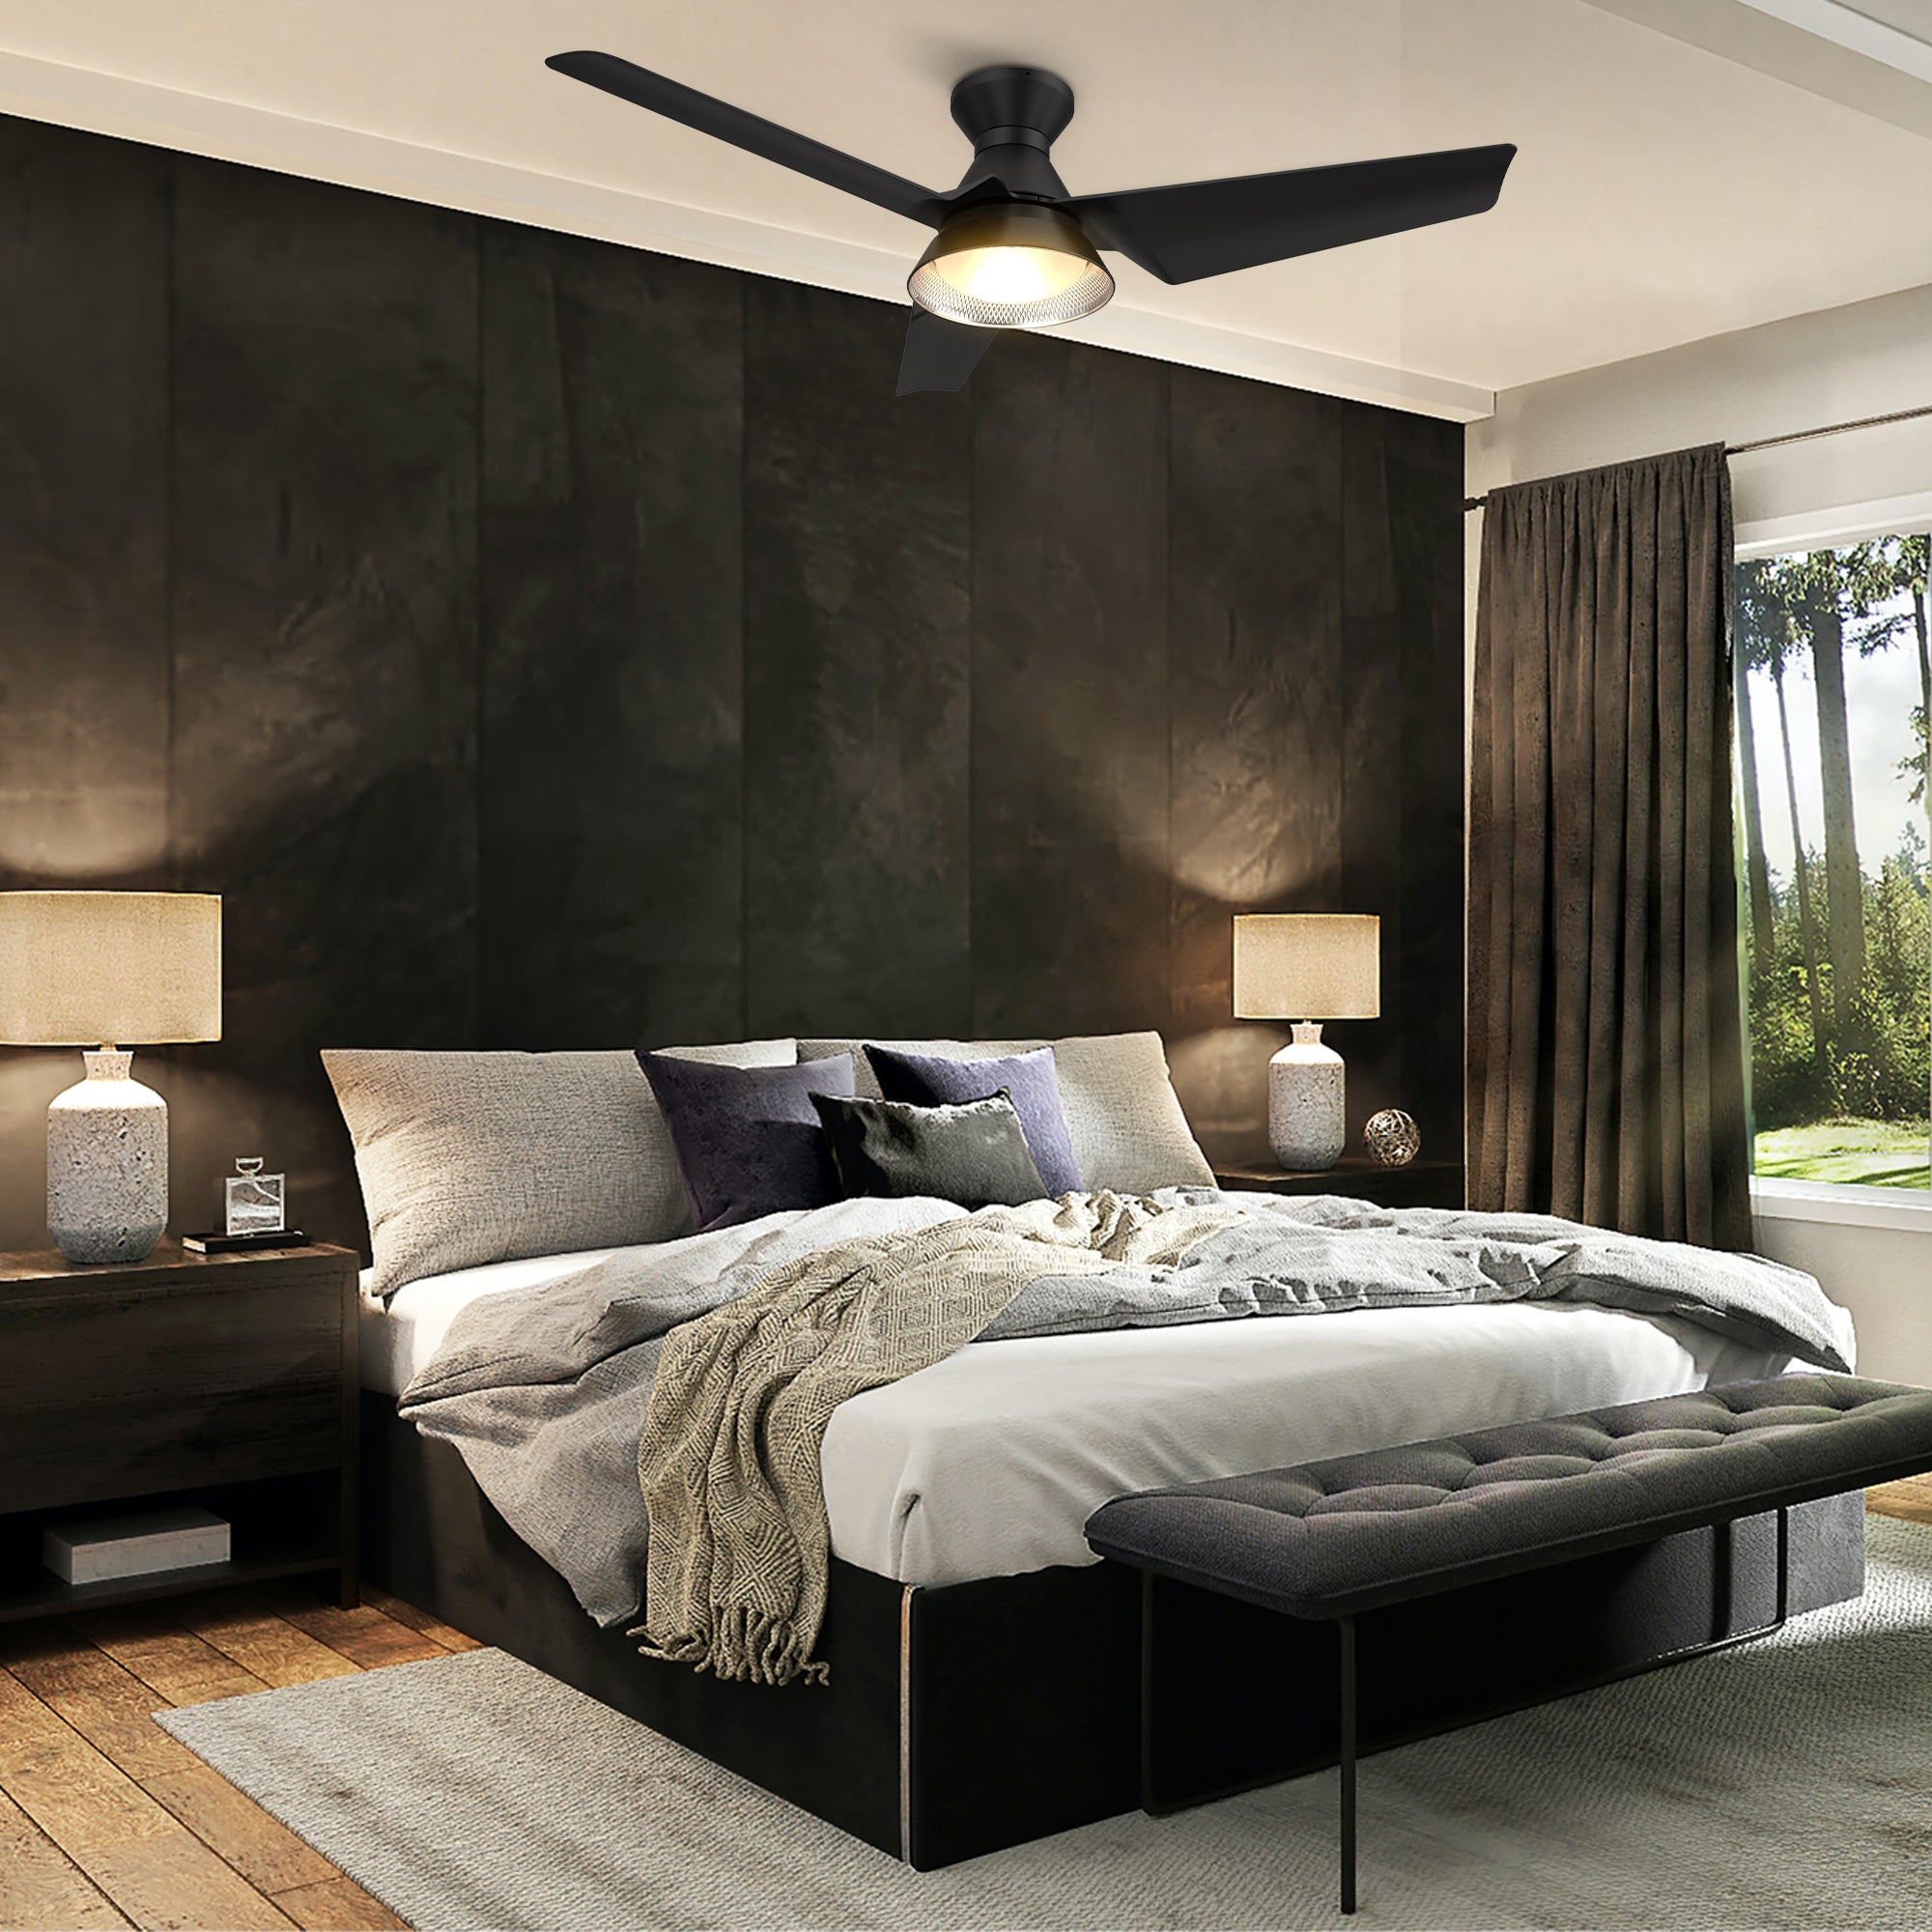 This Smafan Jett 52&#39;&#39; smart ceiling fan keeps your space cool, bright, and stylish. It is a soft modern masterpiece perfect for your large indoor living spaces. This Wifi smart ceiling fan is a simplicity designing with Black finish, use very strong ABS blades and has an integrated 4000K LED daylight. The fan features Remote control, Wi-Fi apps and Voice control technology (compatible with Amazon Alexa and Google Home Assistant, but not included) to set fan preferences.